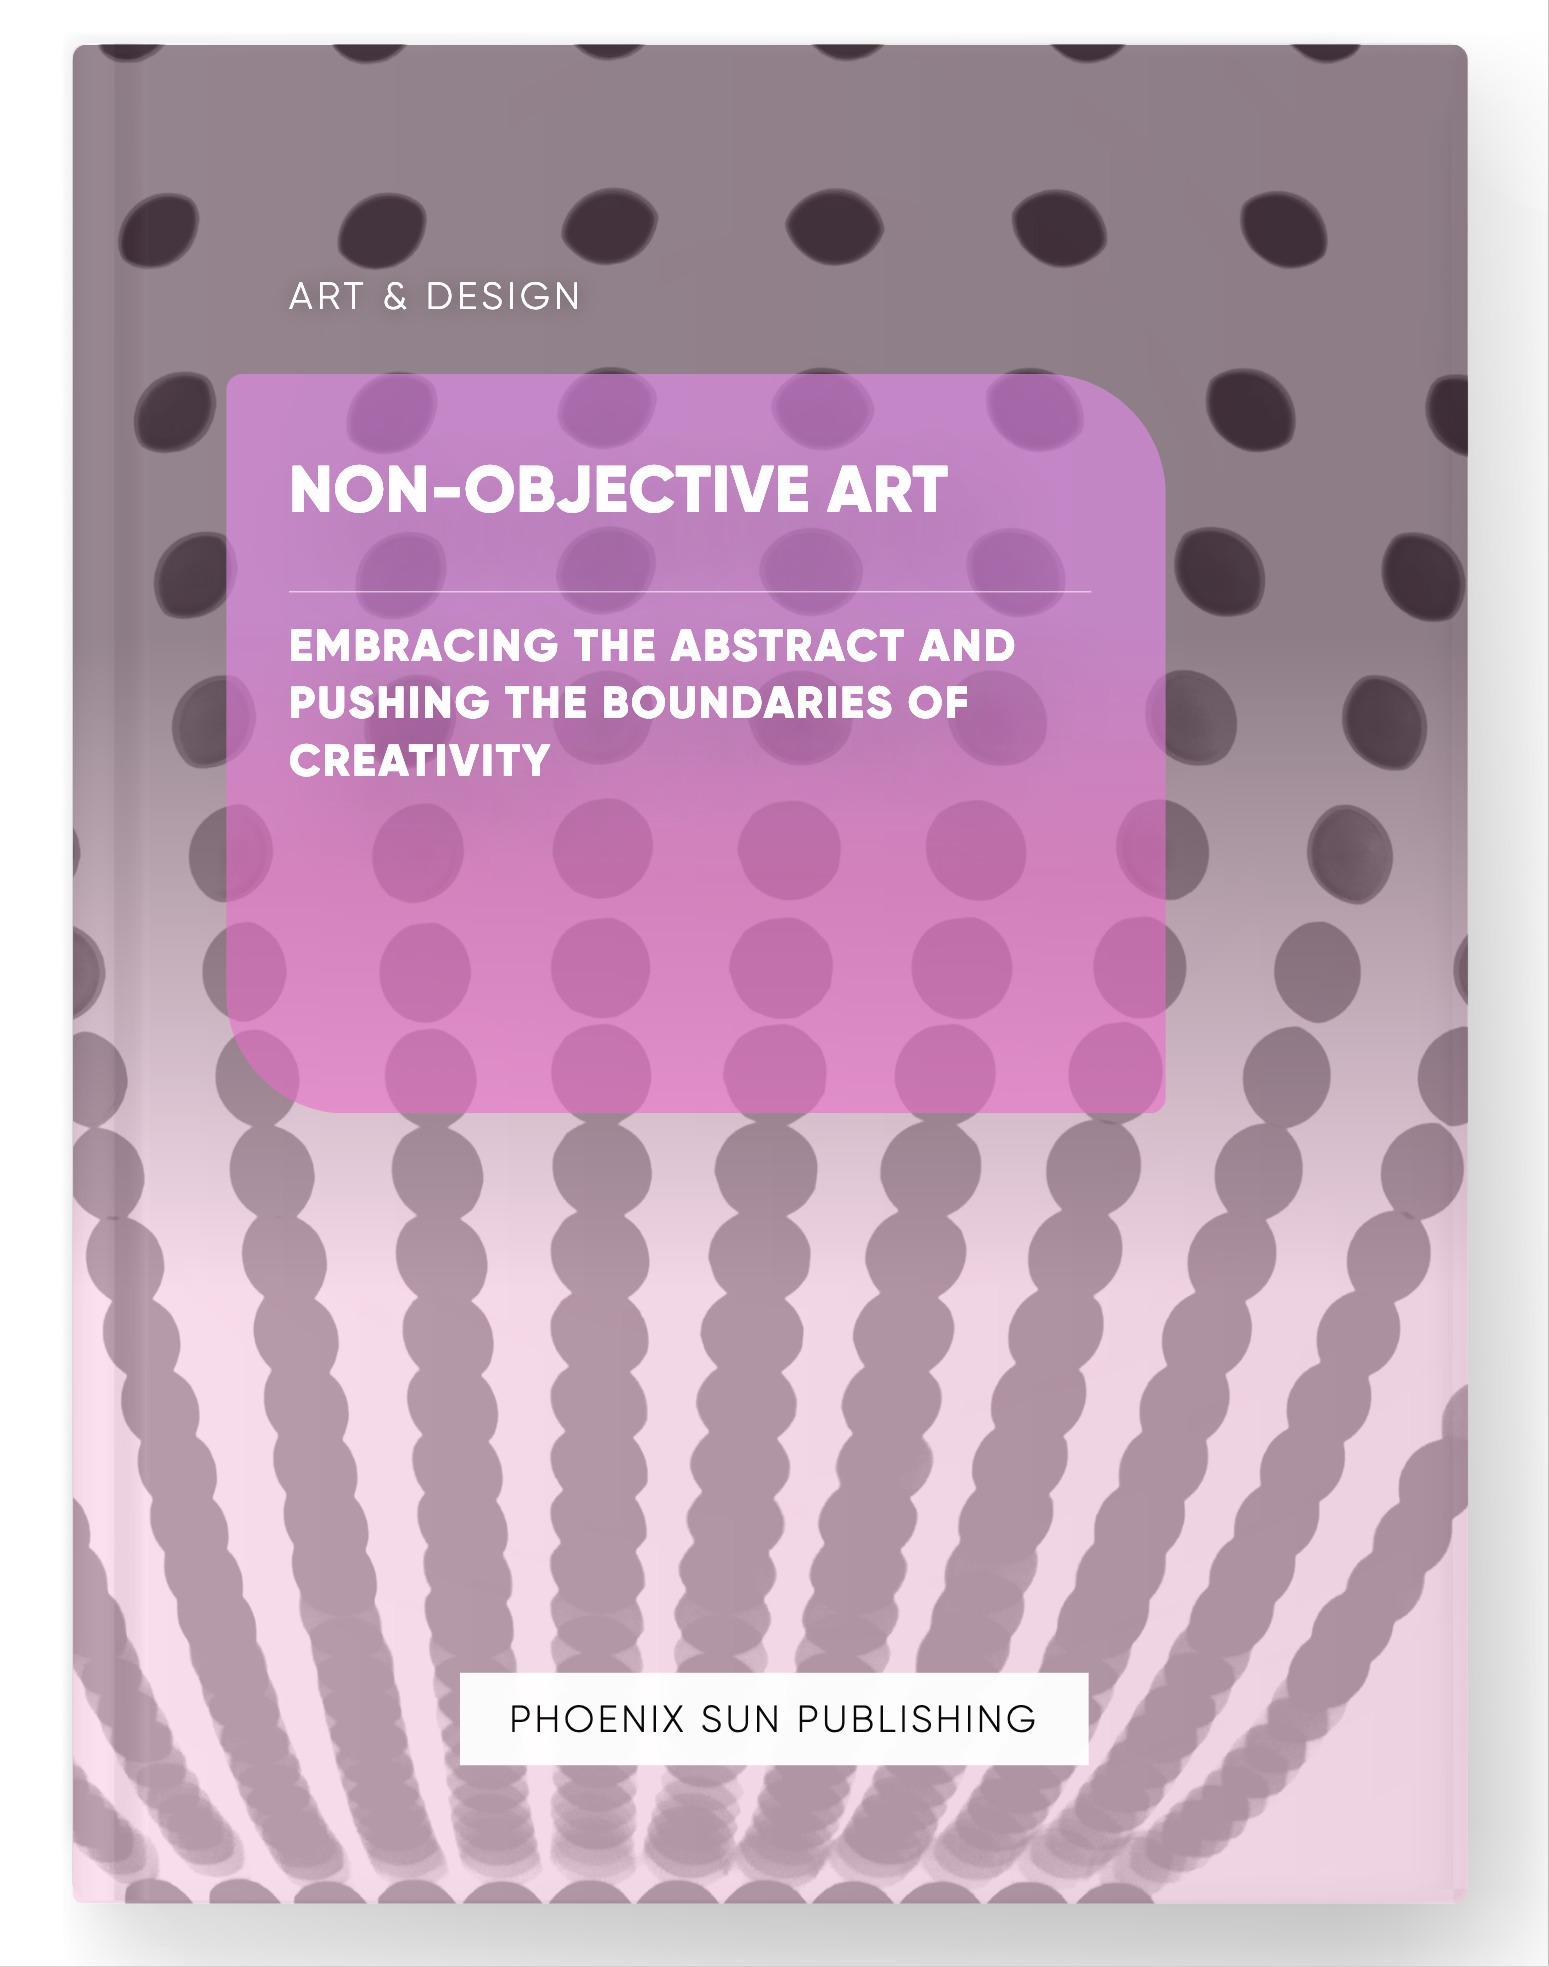 Non-Objective Art – Embracing the Abstract and Pushing the Boundaries of Creativity